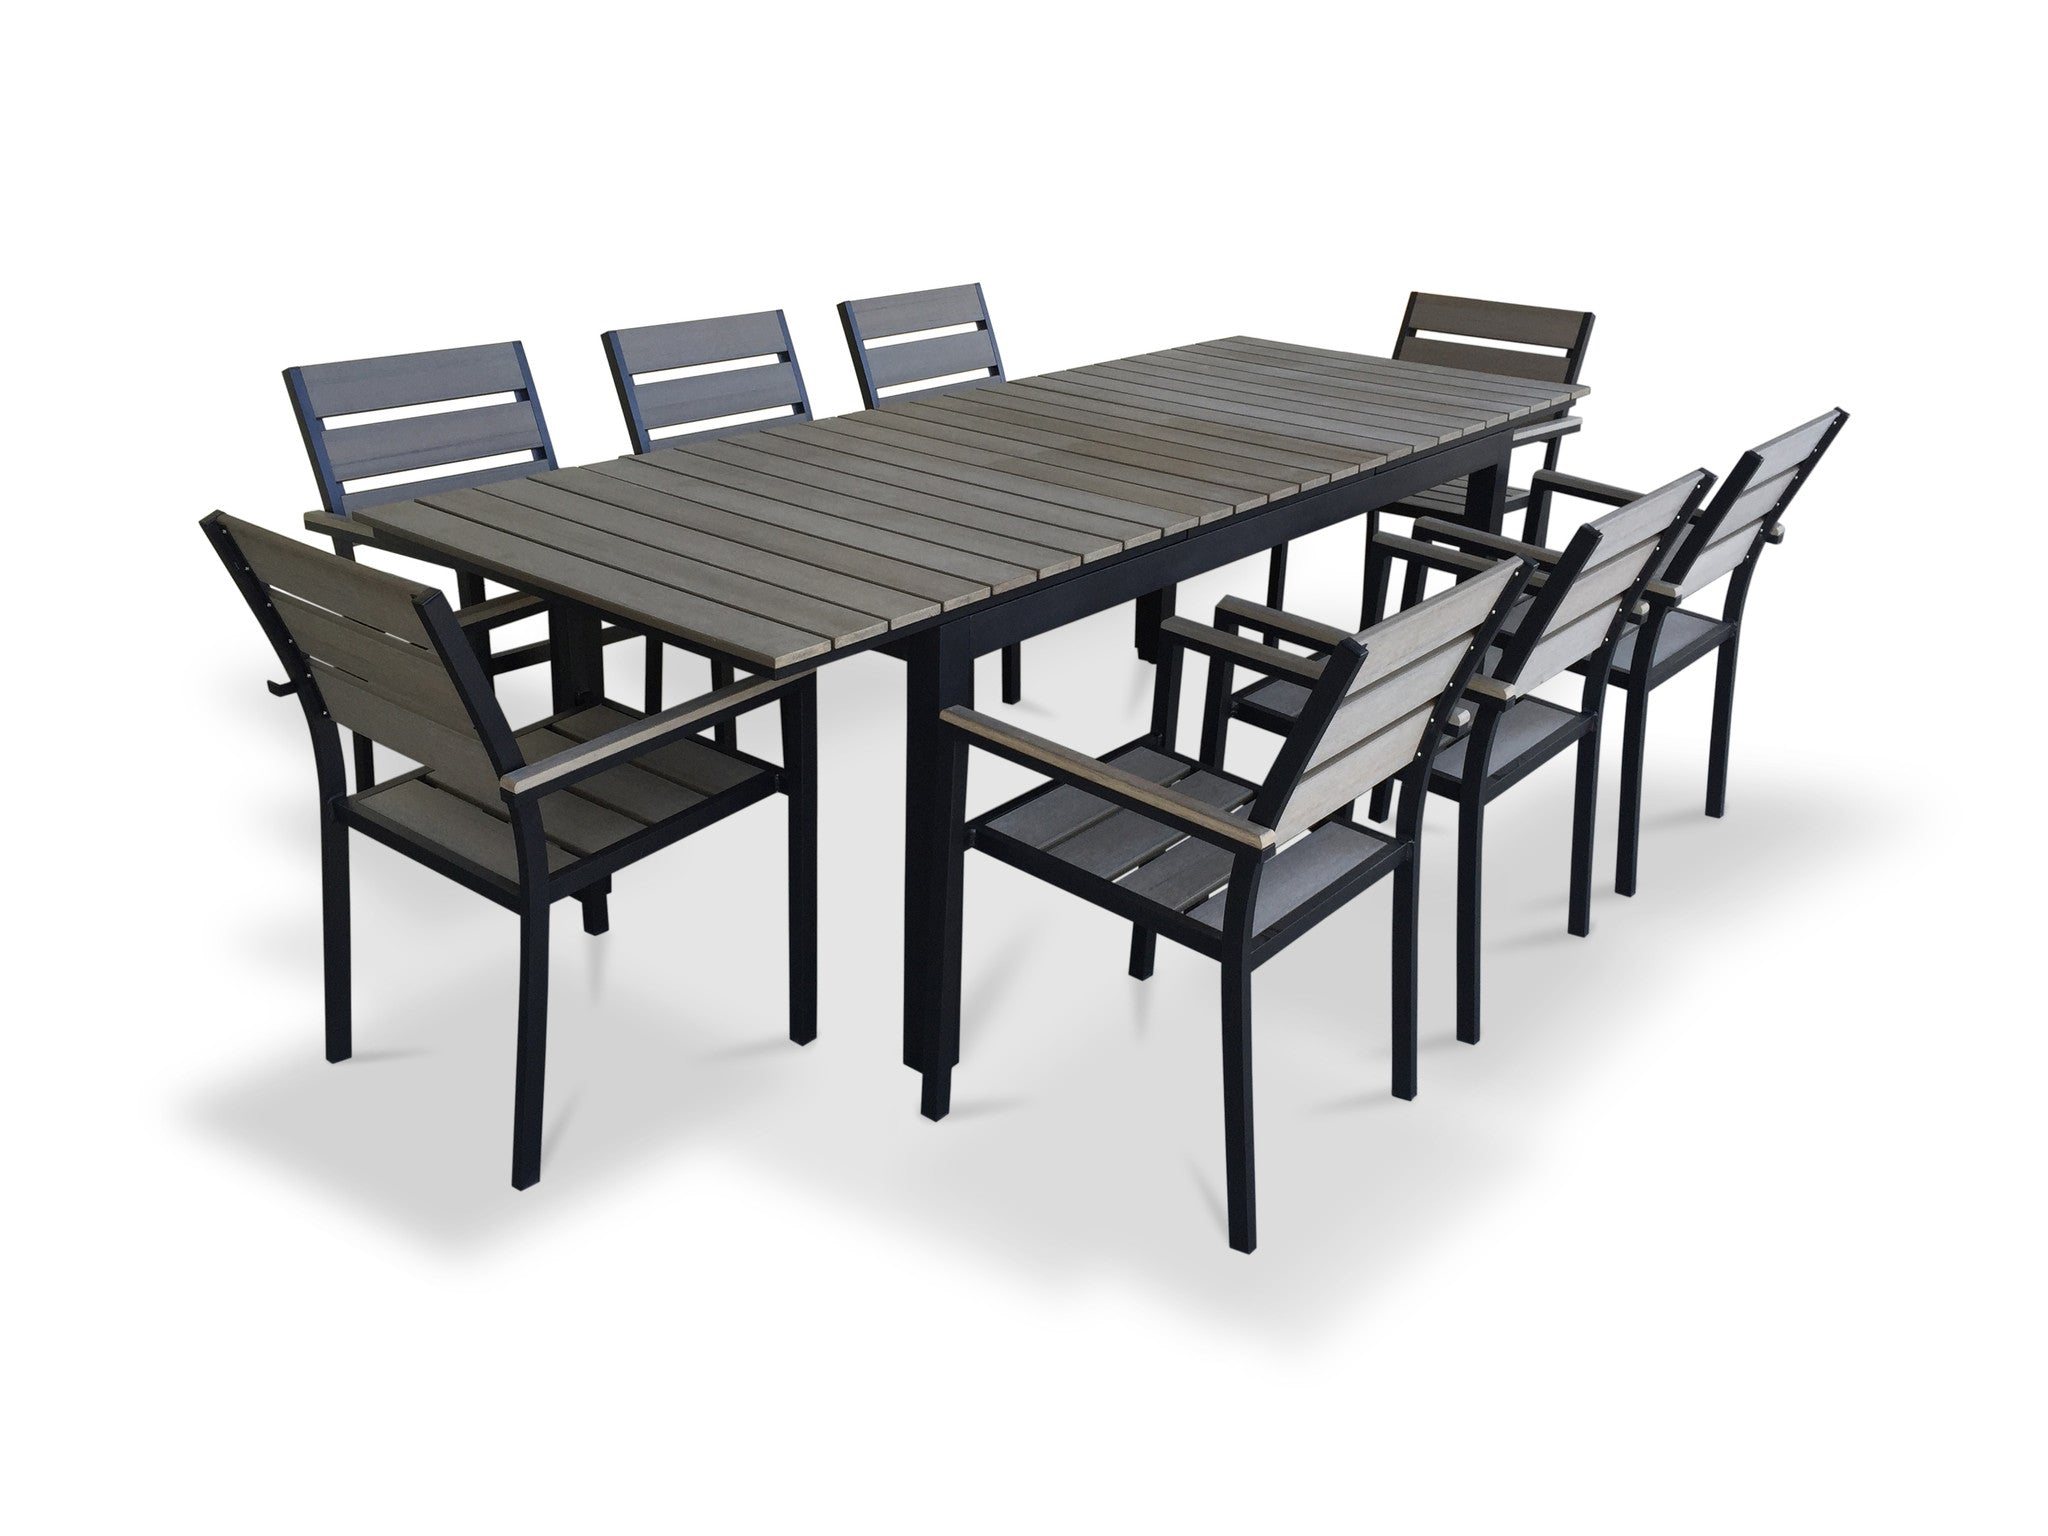 9 Piece Eco-Wood Extendable Outdoor Patio Dining Set - Rustic Gray ...